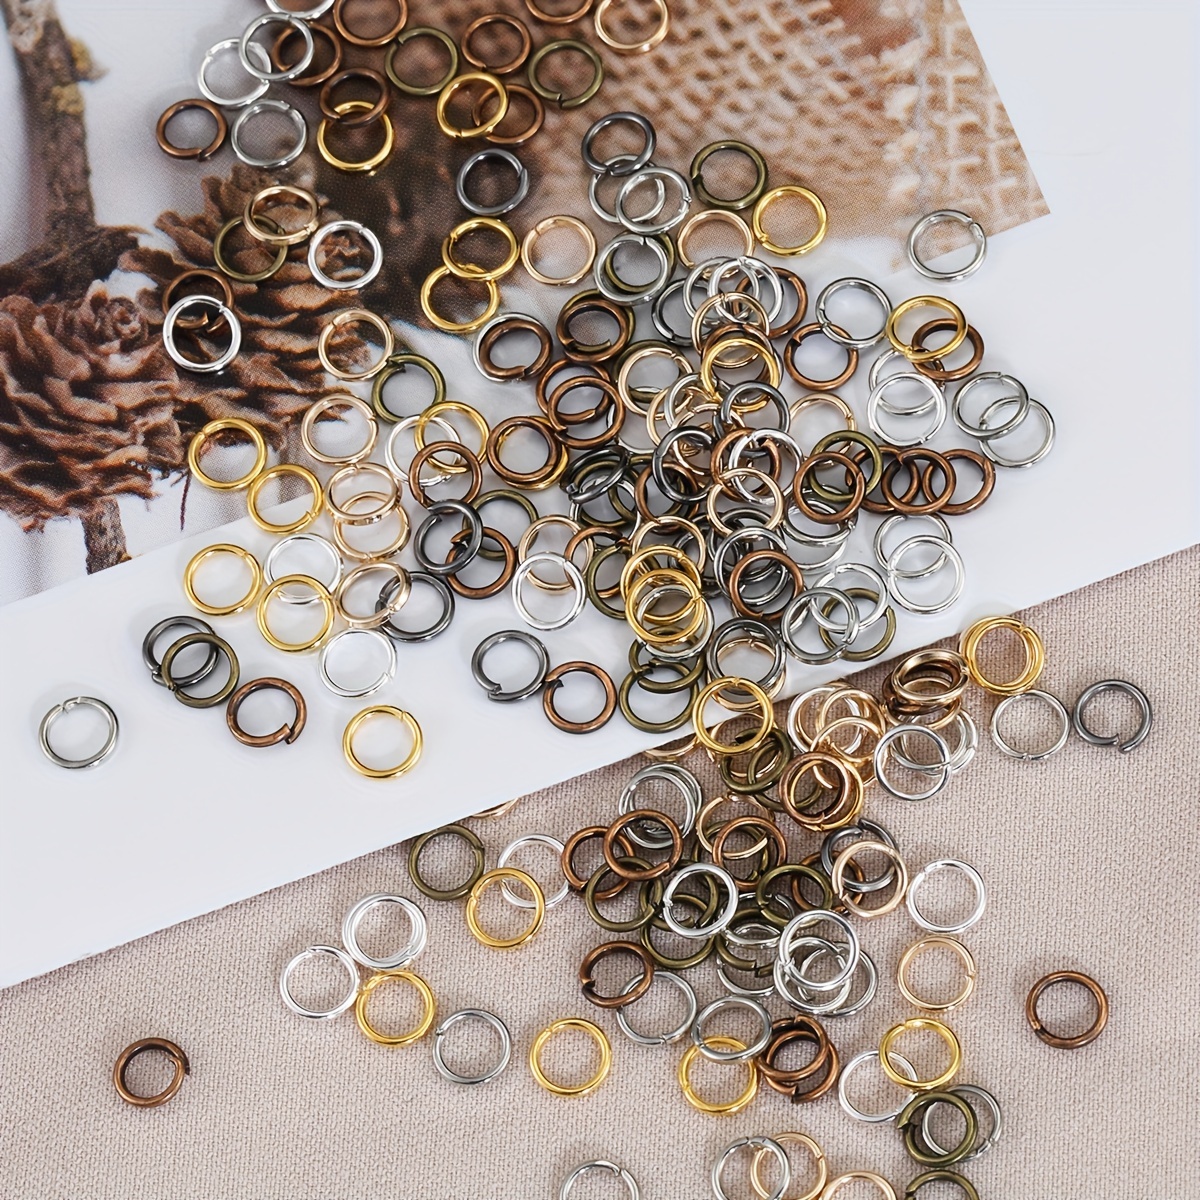 

200pcs Open Jump Rings Split Rings Pendant Connectors Rings For Necklace Bracelet Diy Jewelry Making Accessories Small Business Supplies